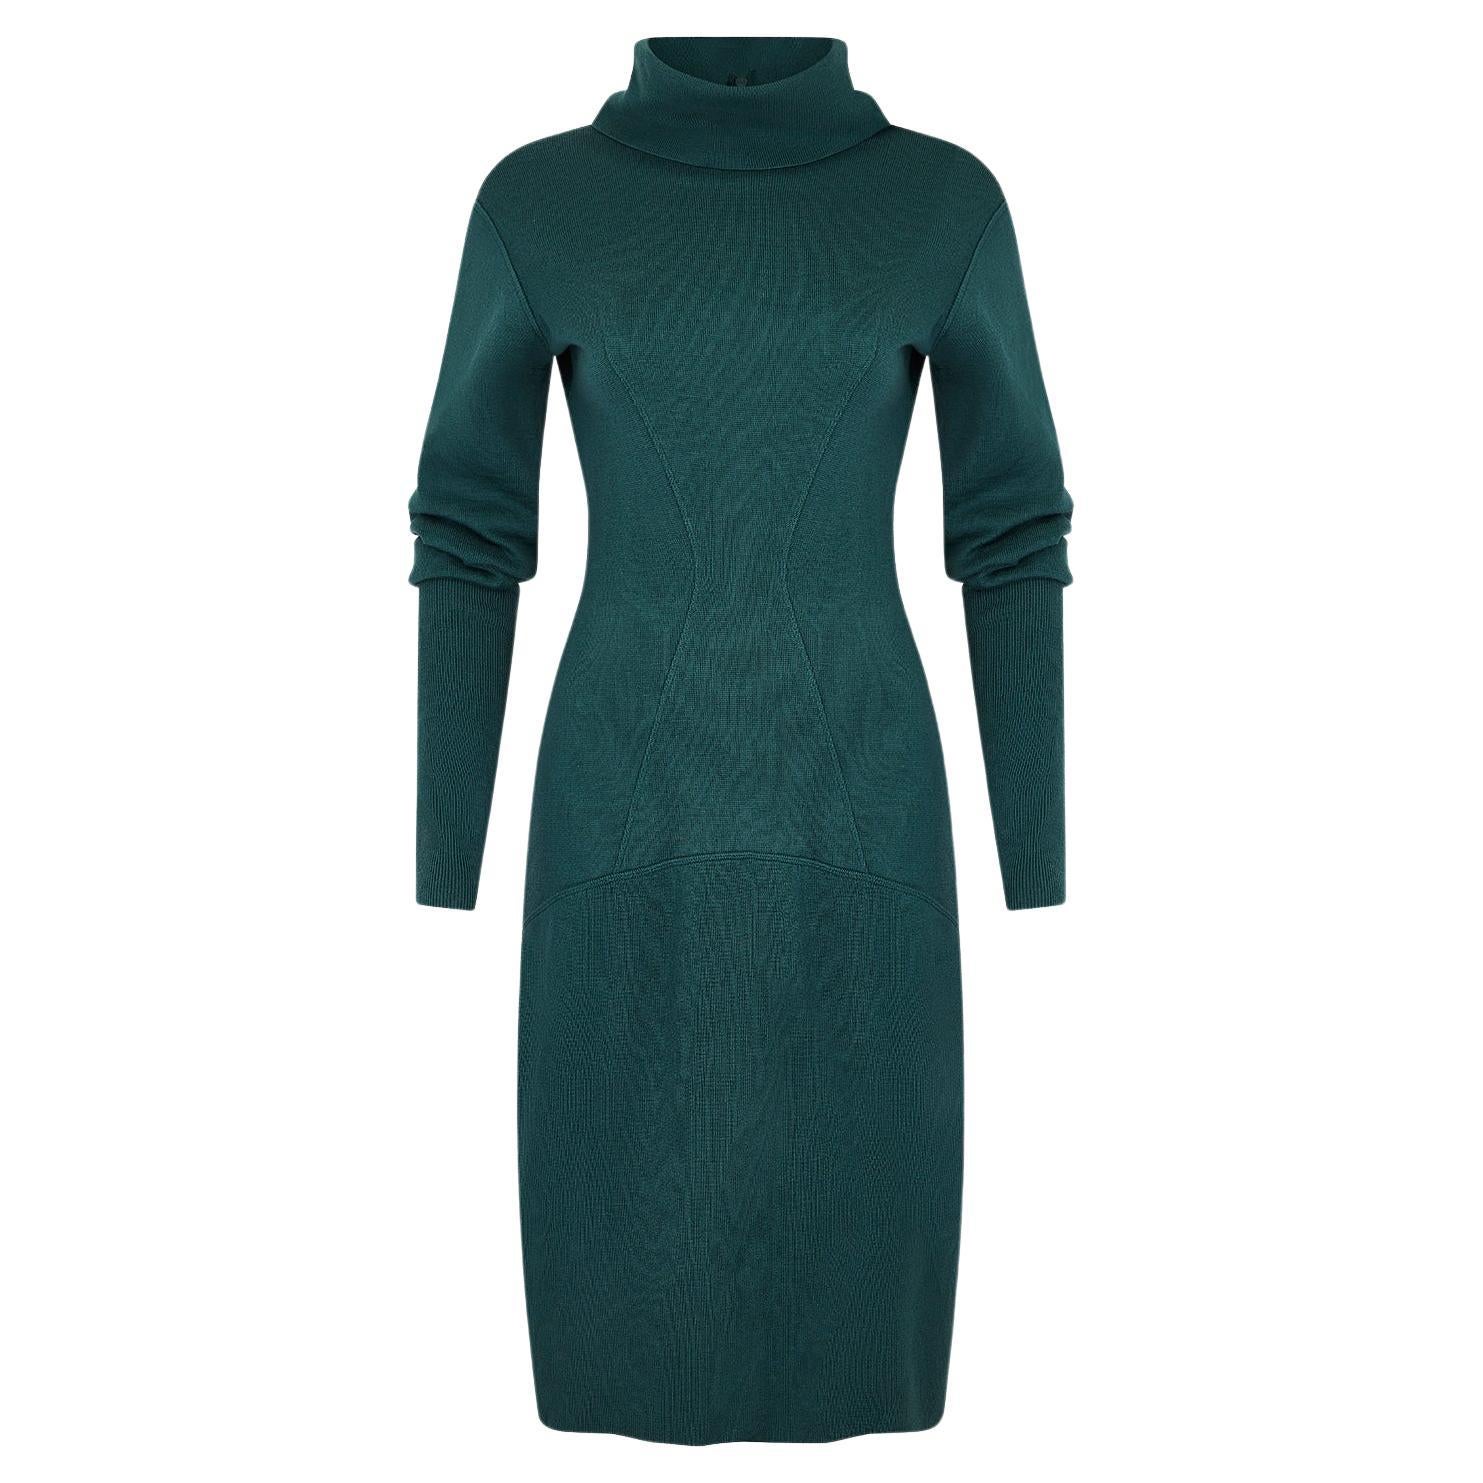 1980s Alaia Wool Teal Green Bodycon Dress For Sale